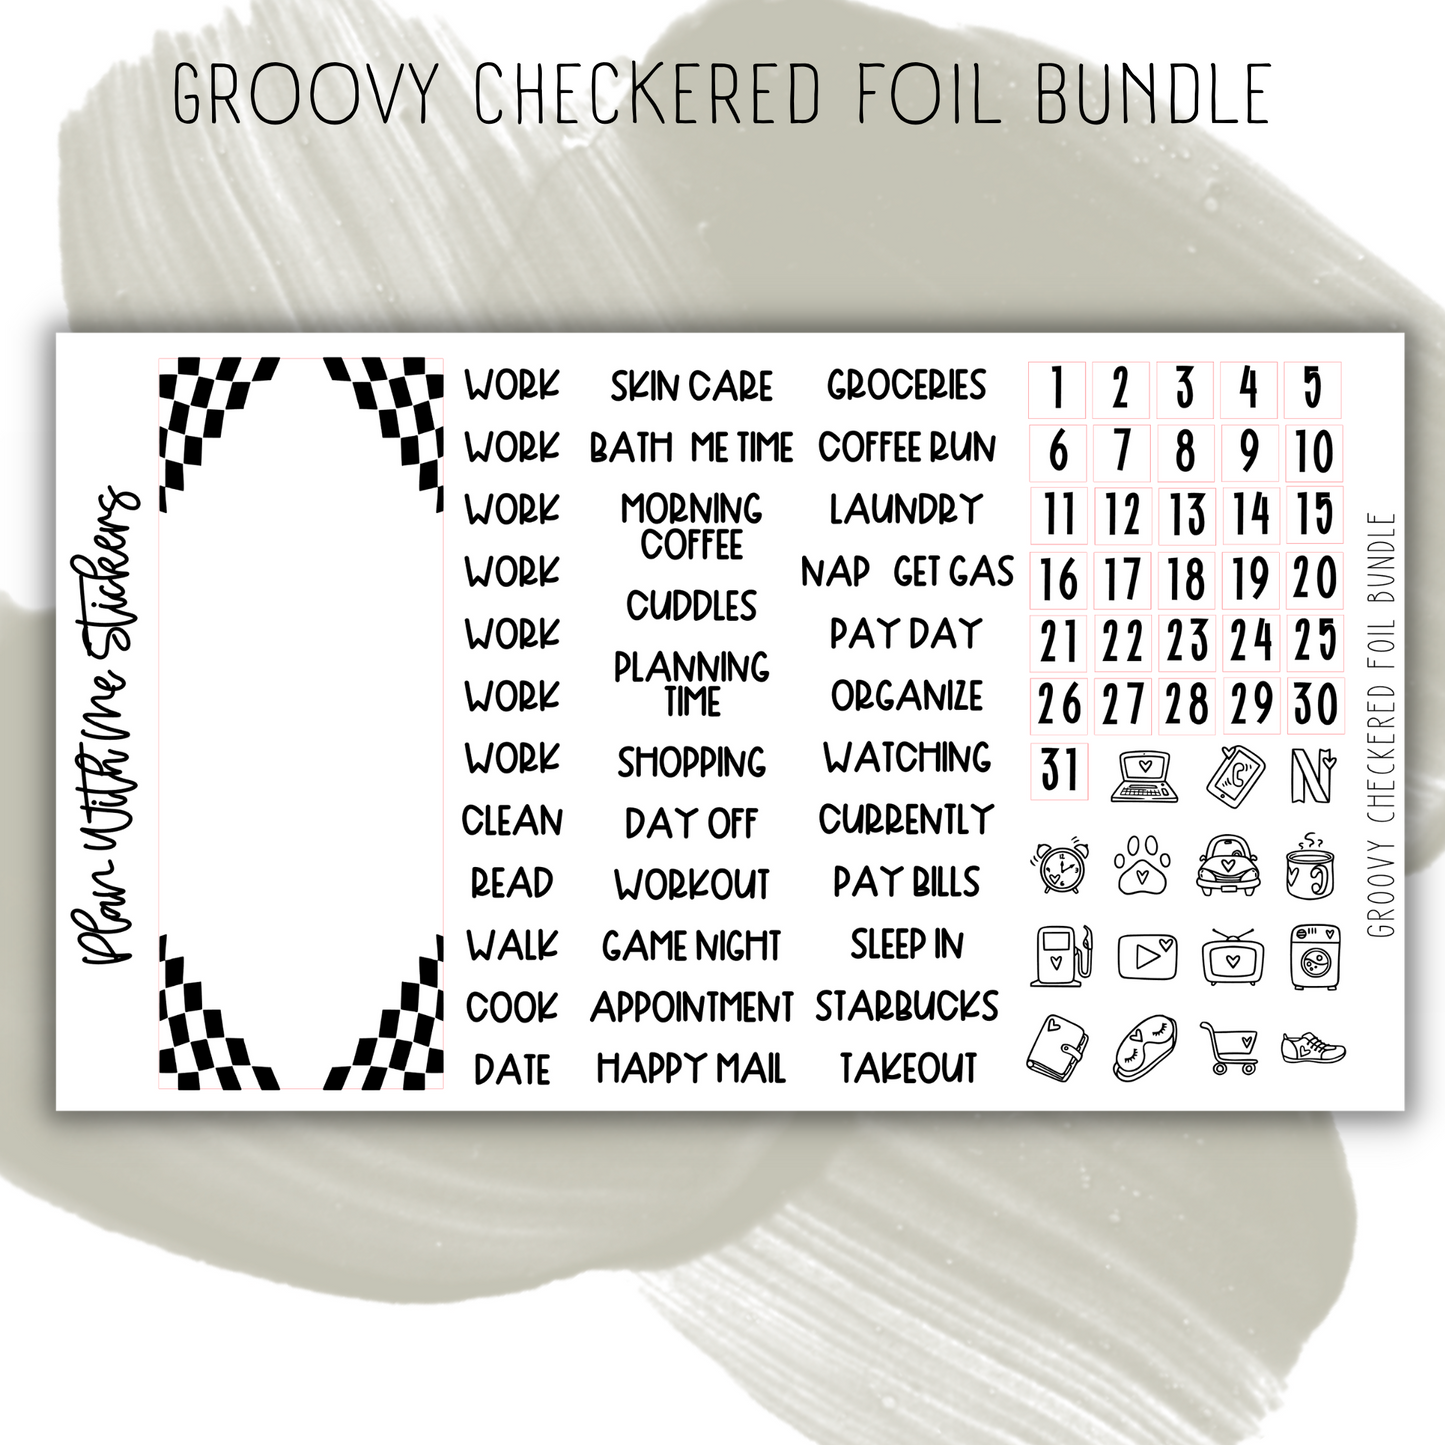 Groovy Checkered Foil Bundle